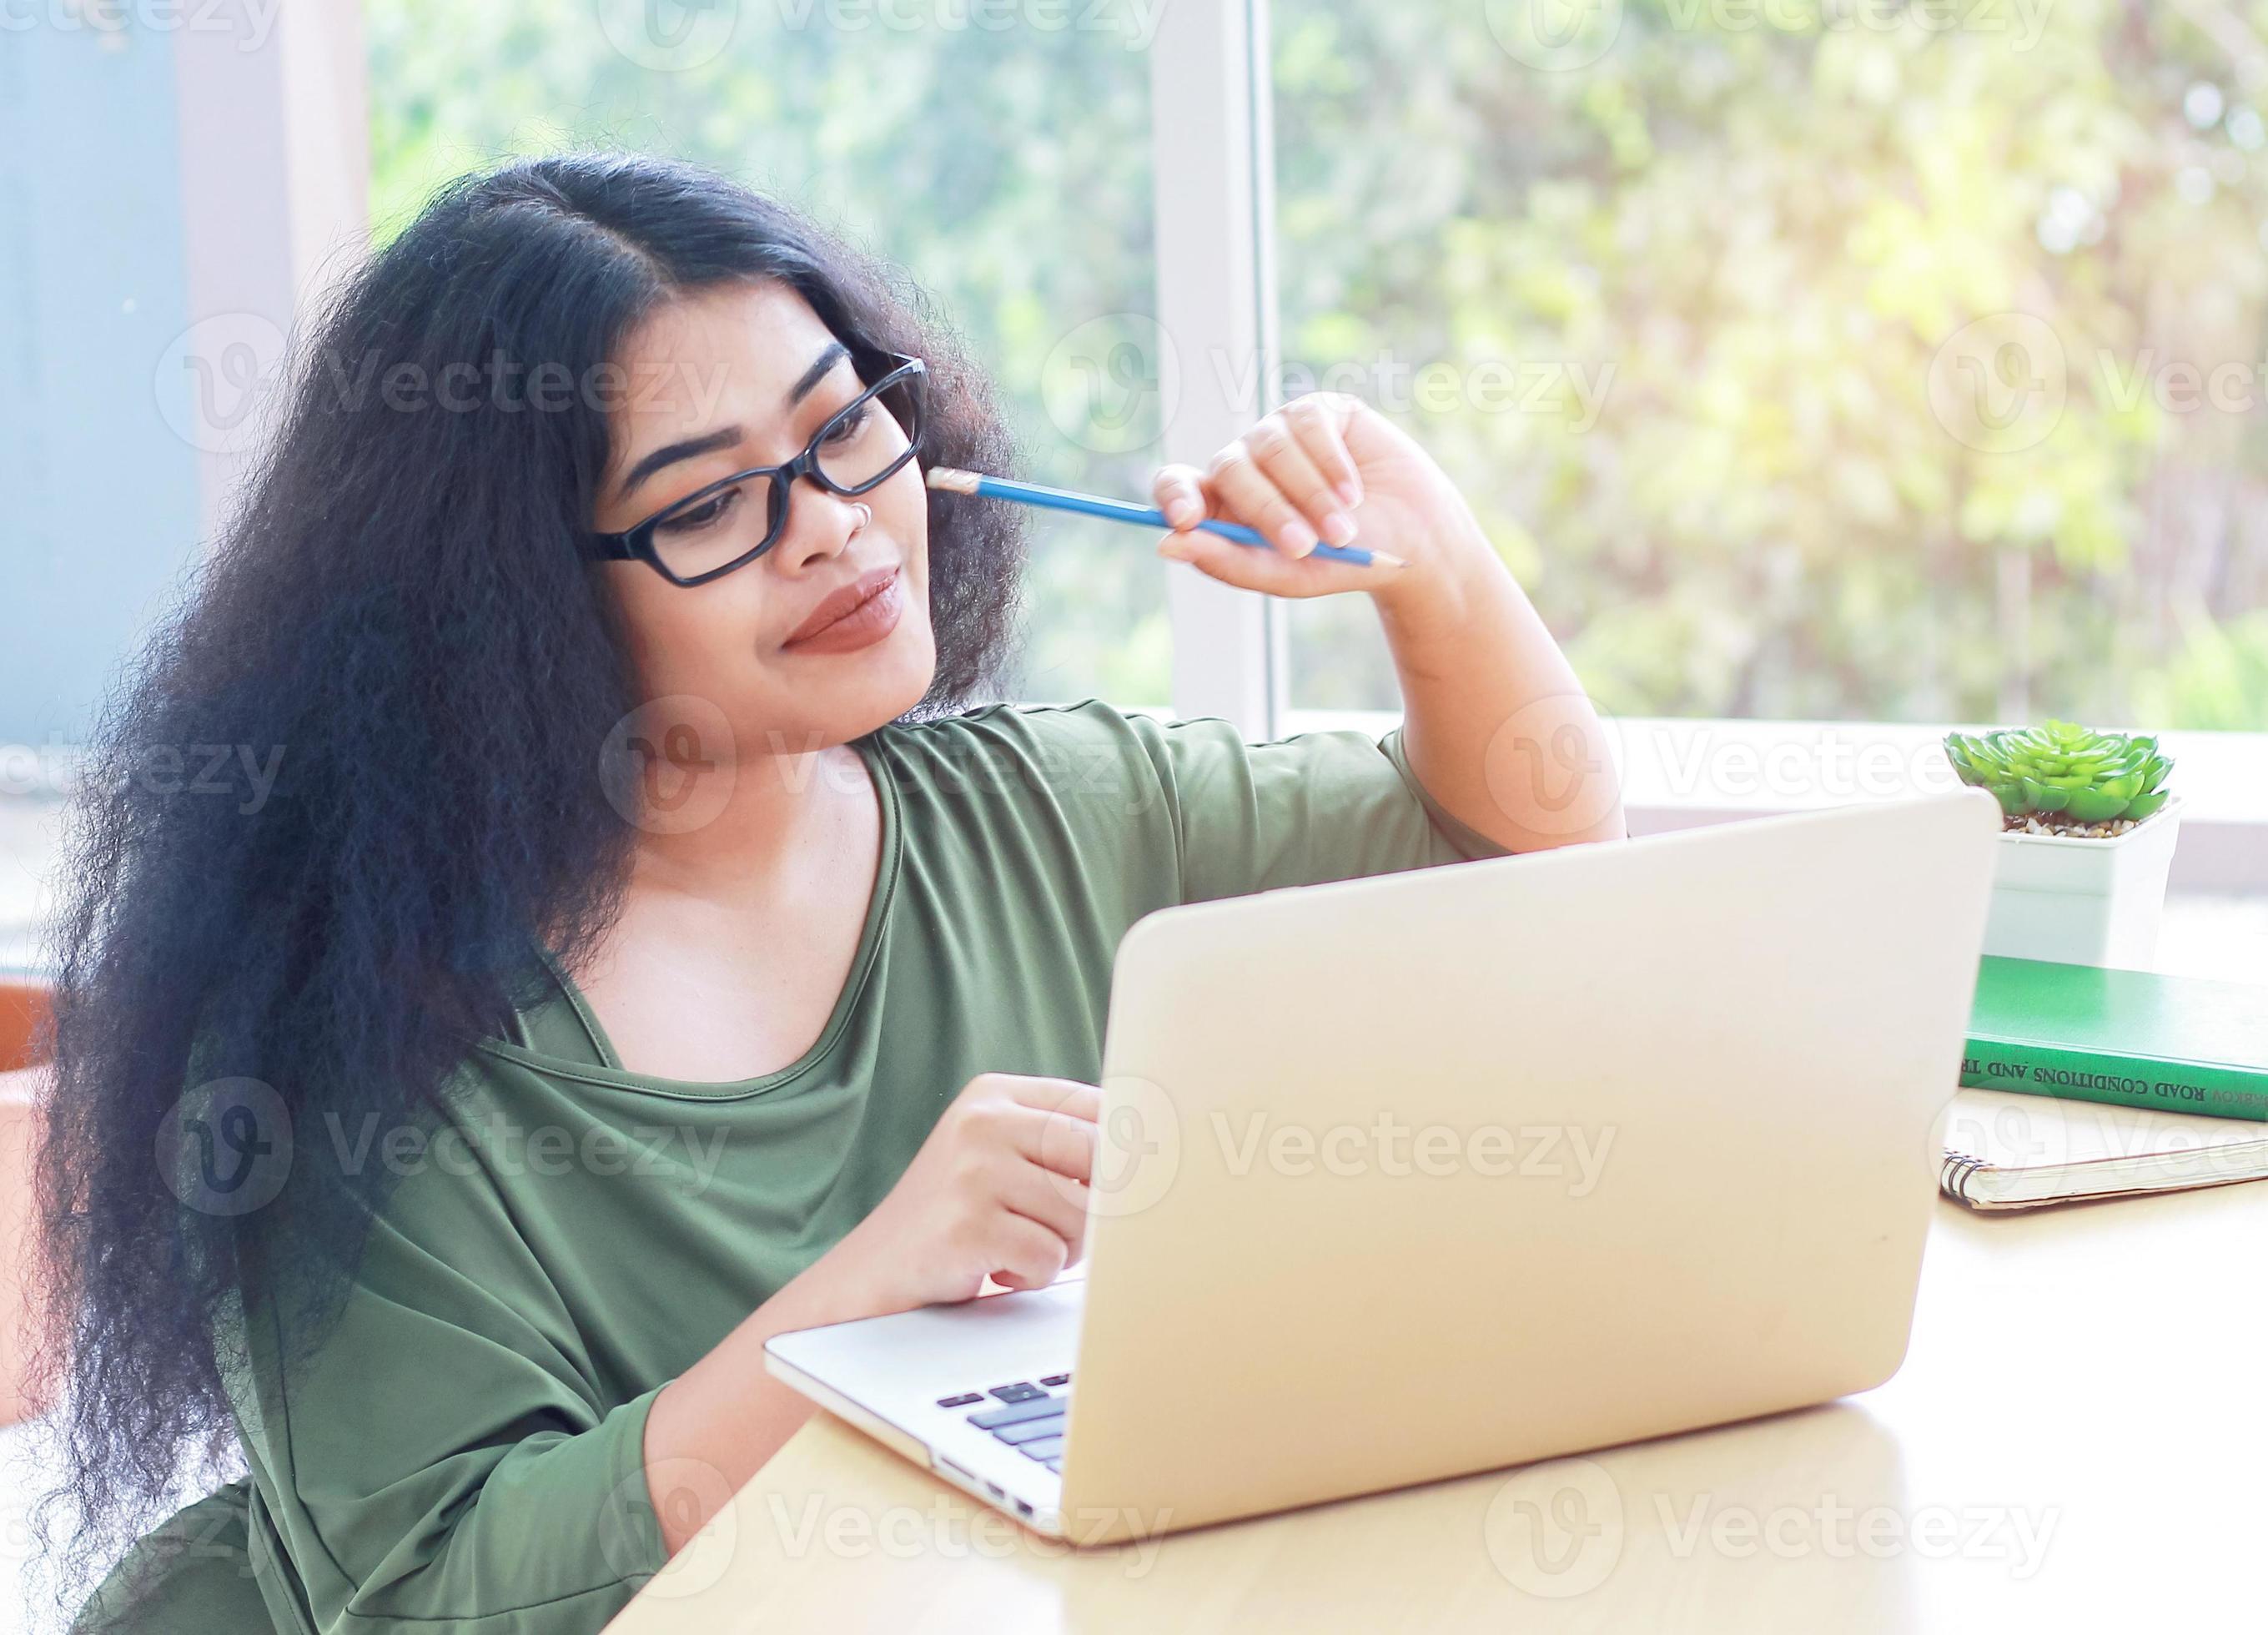 Woman working on a laptop at home during COVID-19 photo